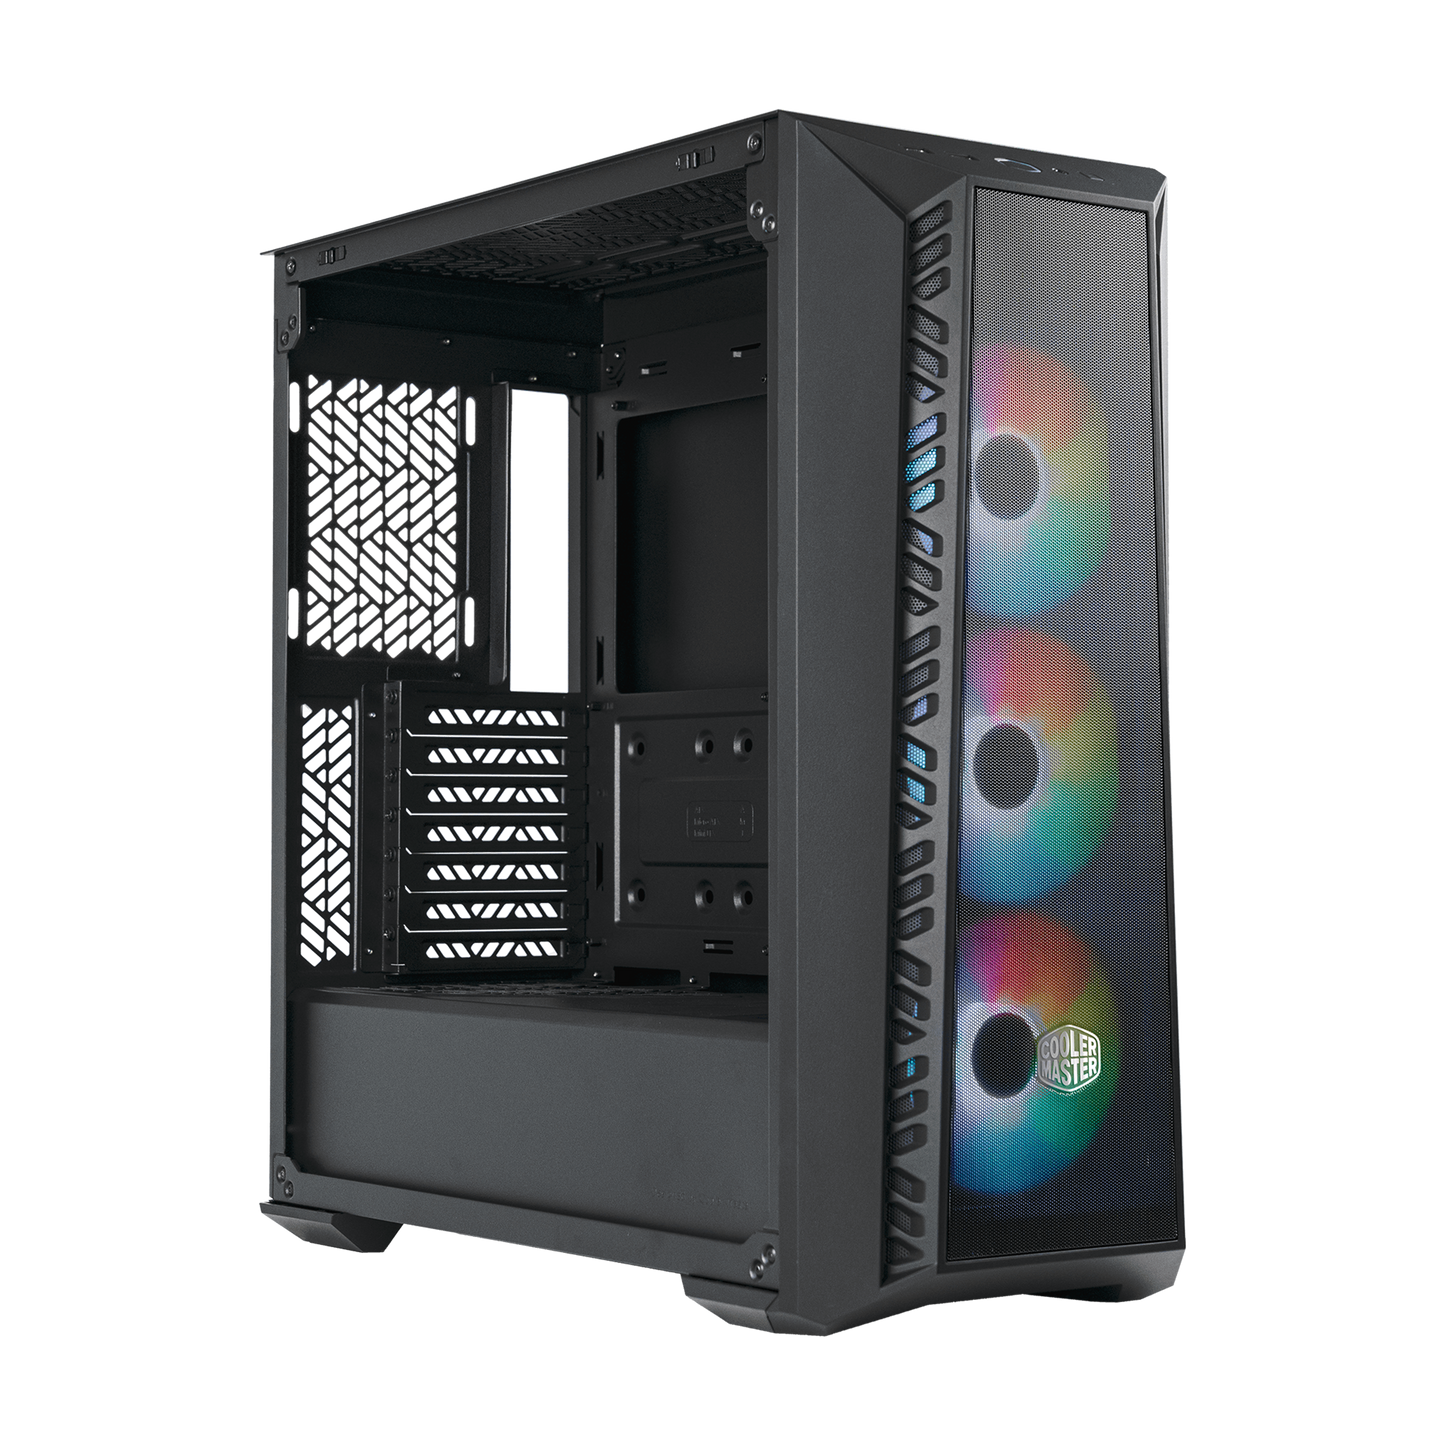 Cooler Master MasterBox 520Mesh - Mid Tower PC Case with ARGB